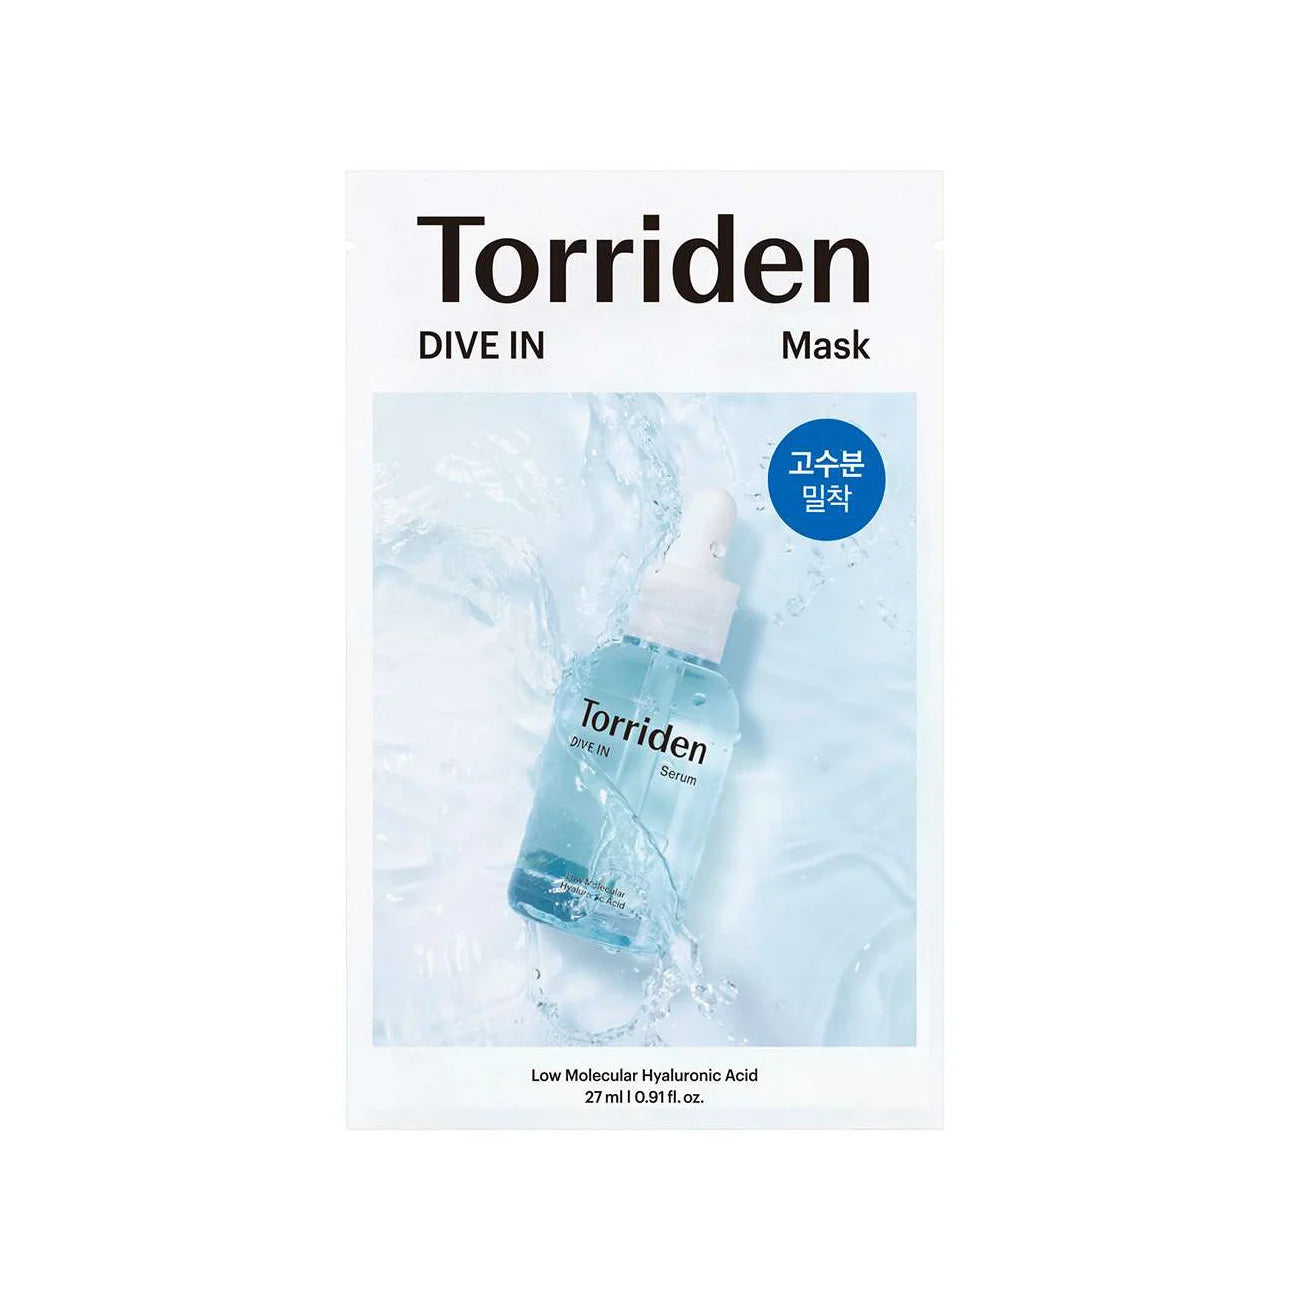 Torriden DIVE-IN Low Molecular Hyaluronic Acid Mask Pack best hydrating Korean vegan sheet mask for quick easy home self care dry dehydrated dull skin before makeup K Beauty World